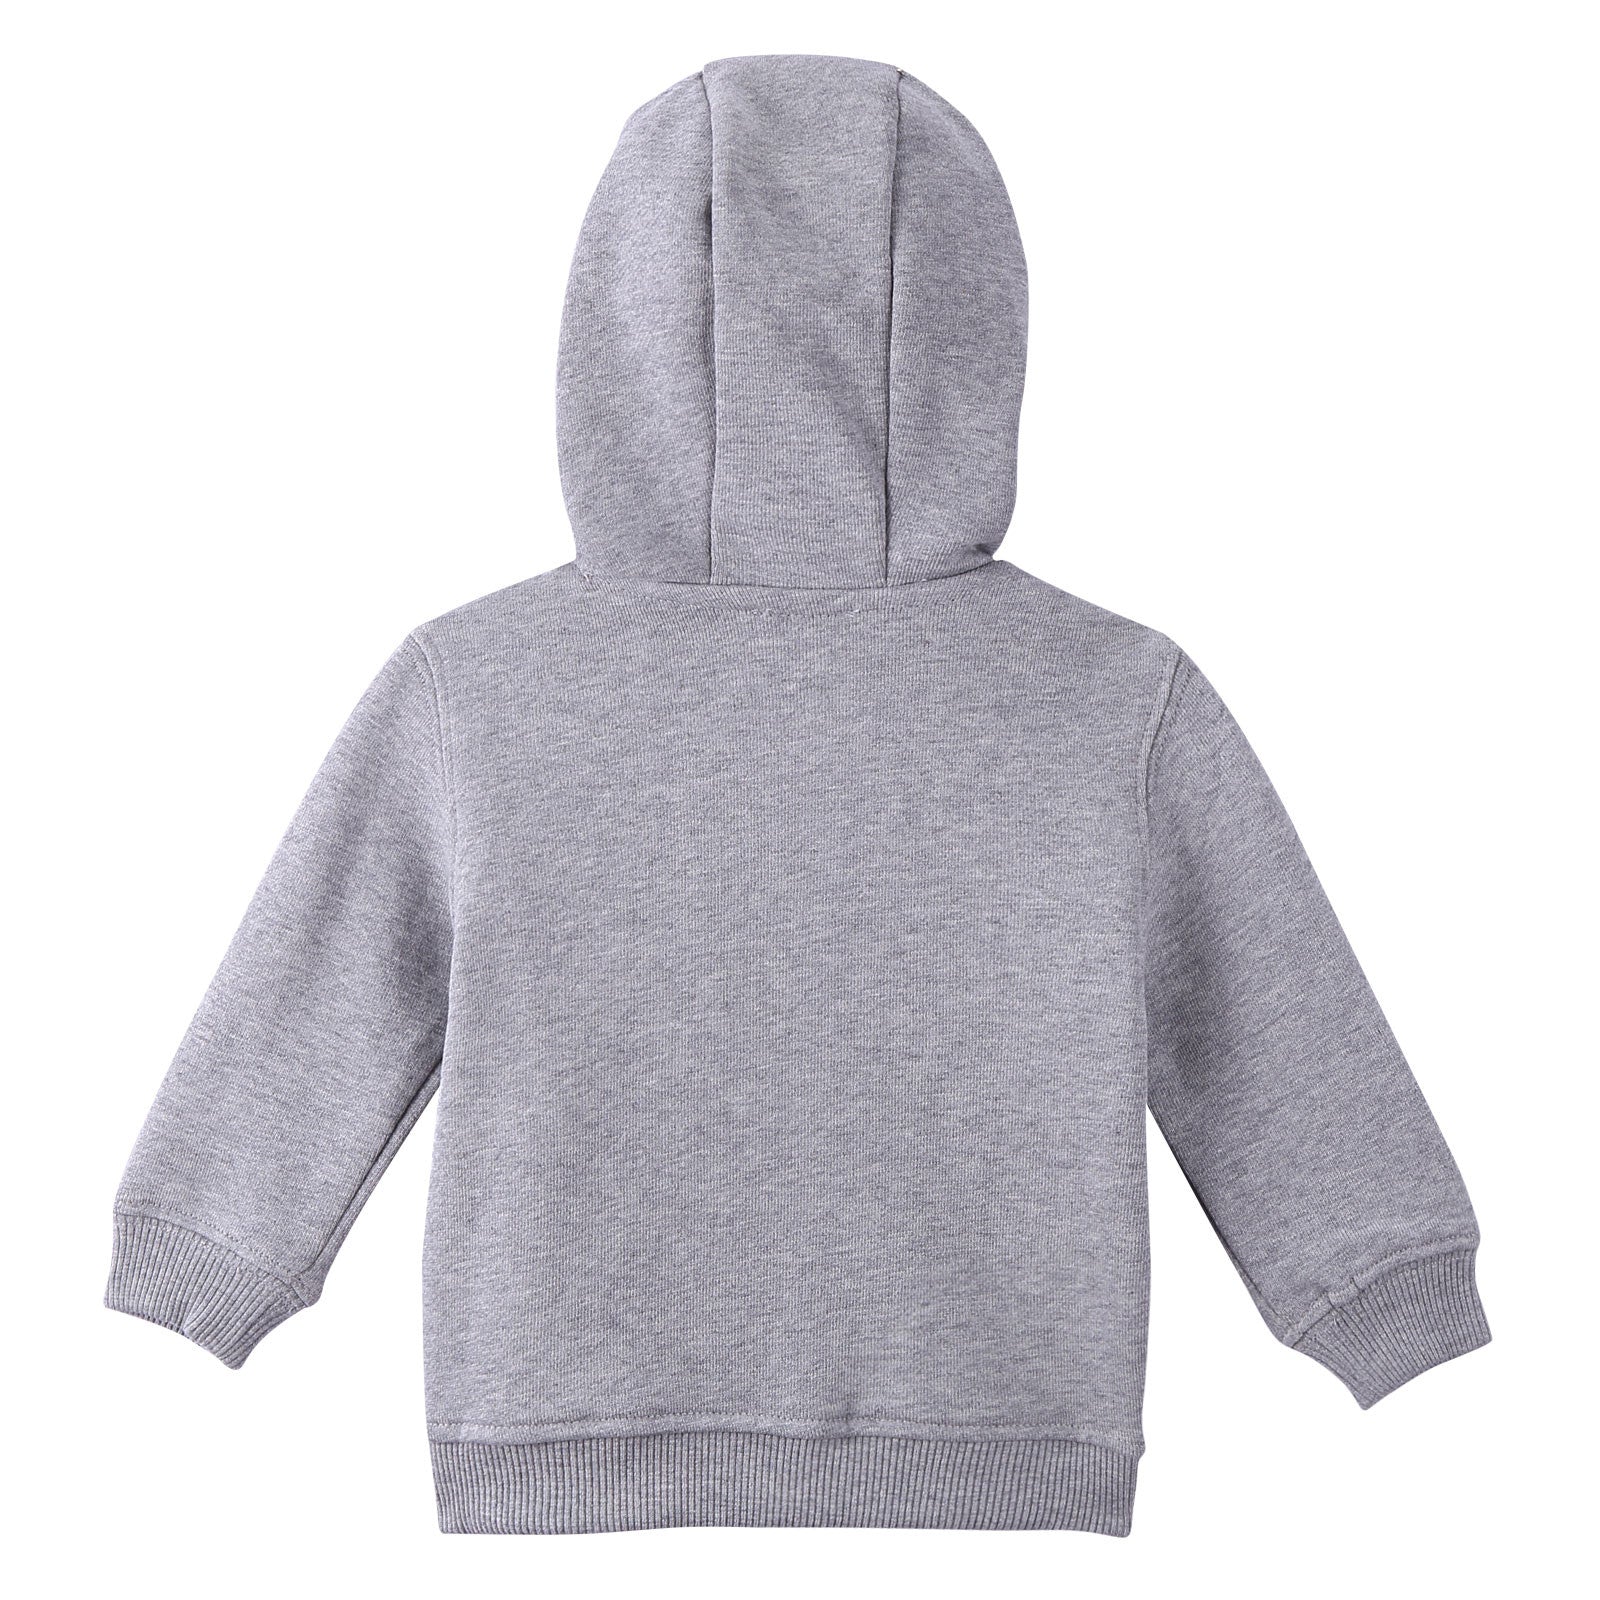 Baby Boys Grey Cotton Car Printed Hooded Zip-Up Top - CÉMAROSE | Children's Fashion Store - 2